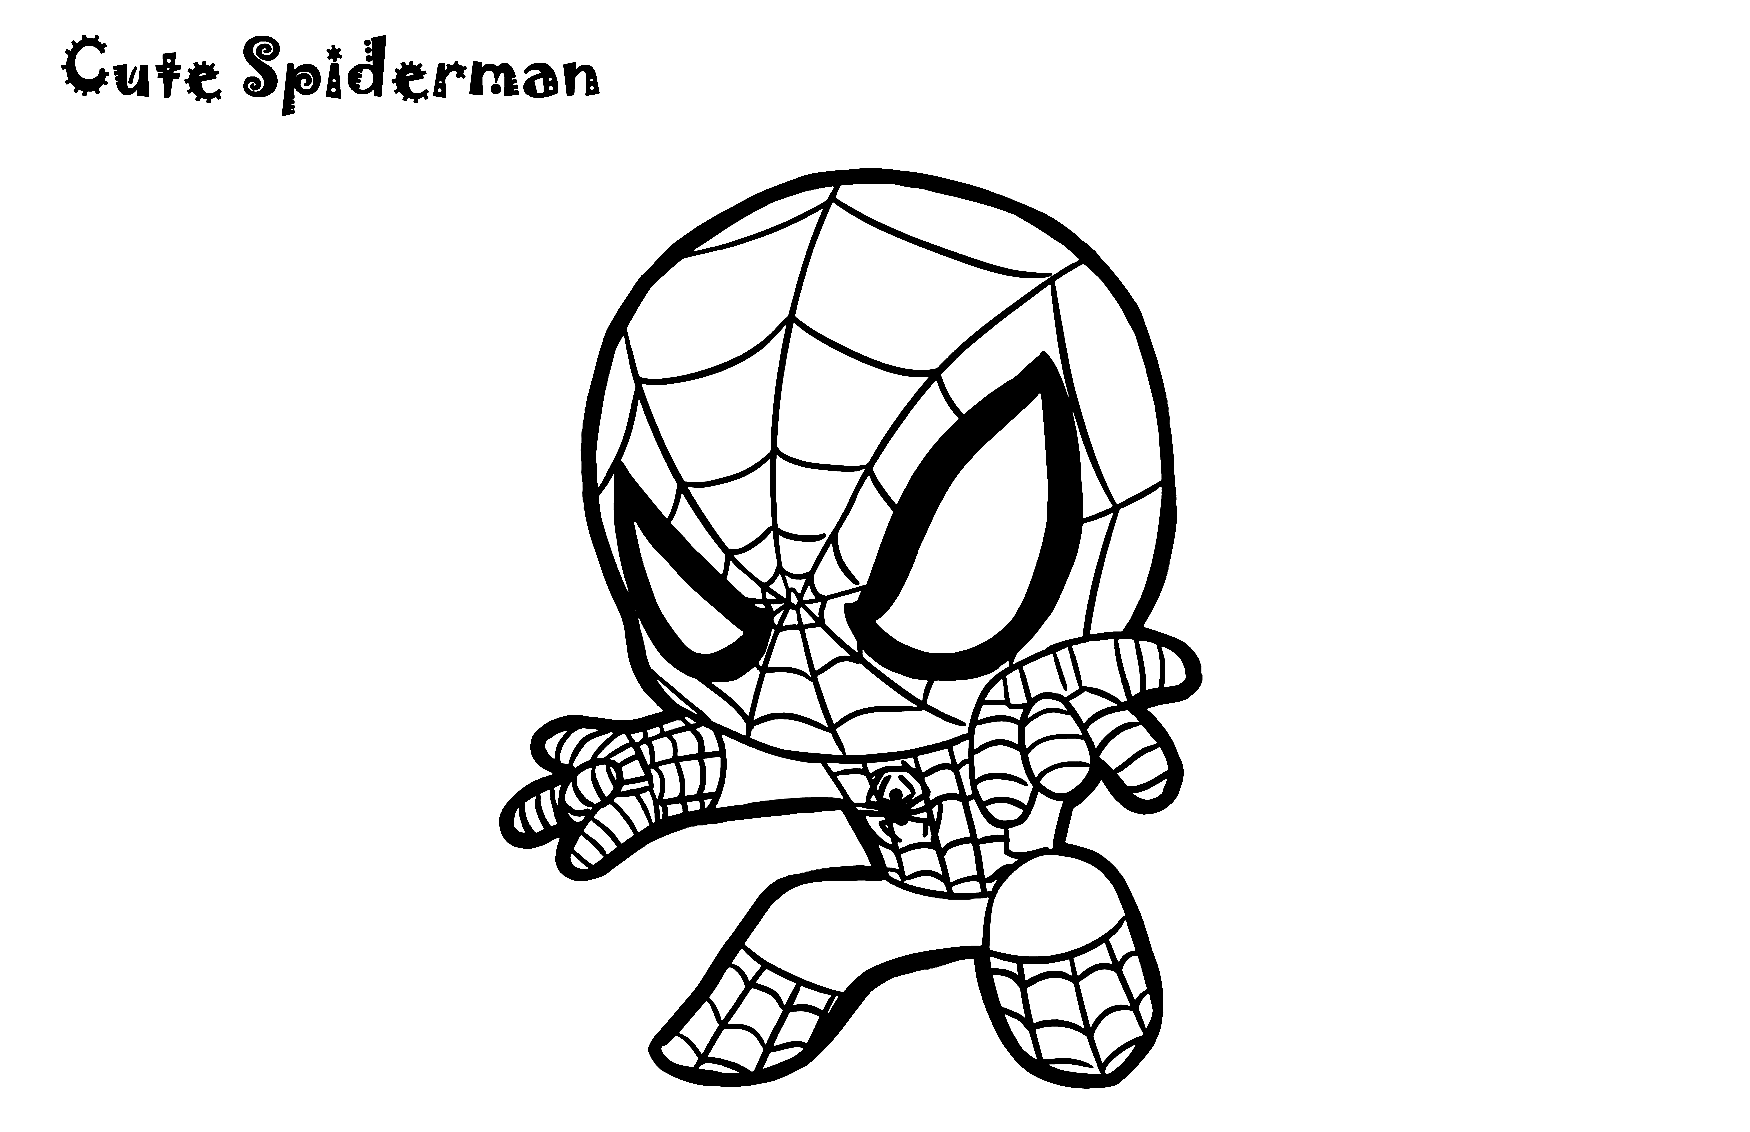 Cute & Easy Spiderman Coloring Pages: Printable PDF